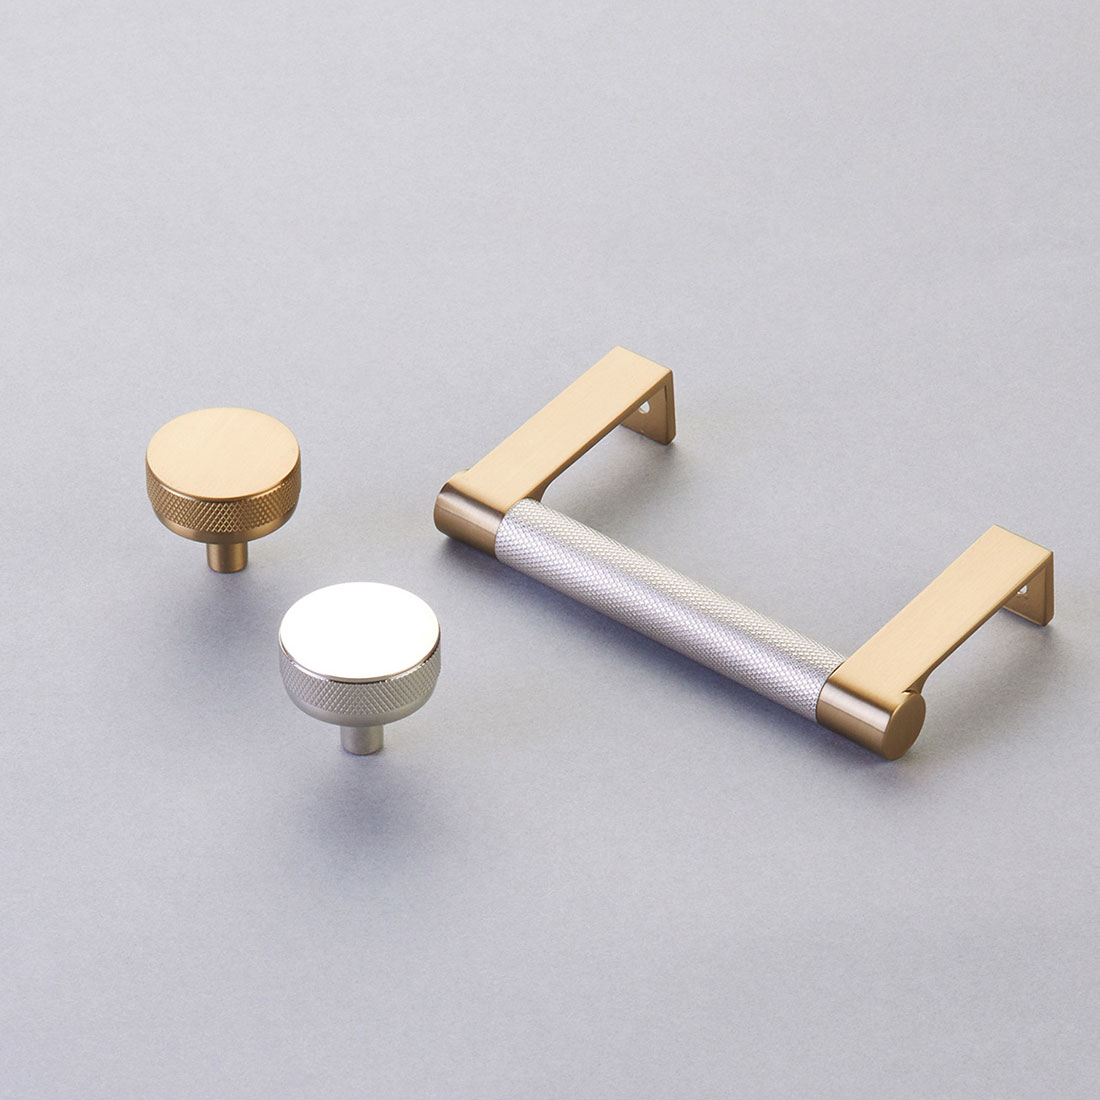 Drawer Knobs for sale in Toronto, Ontario